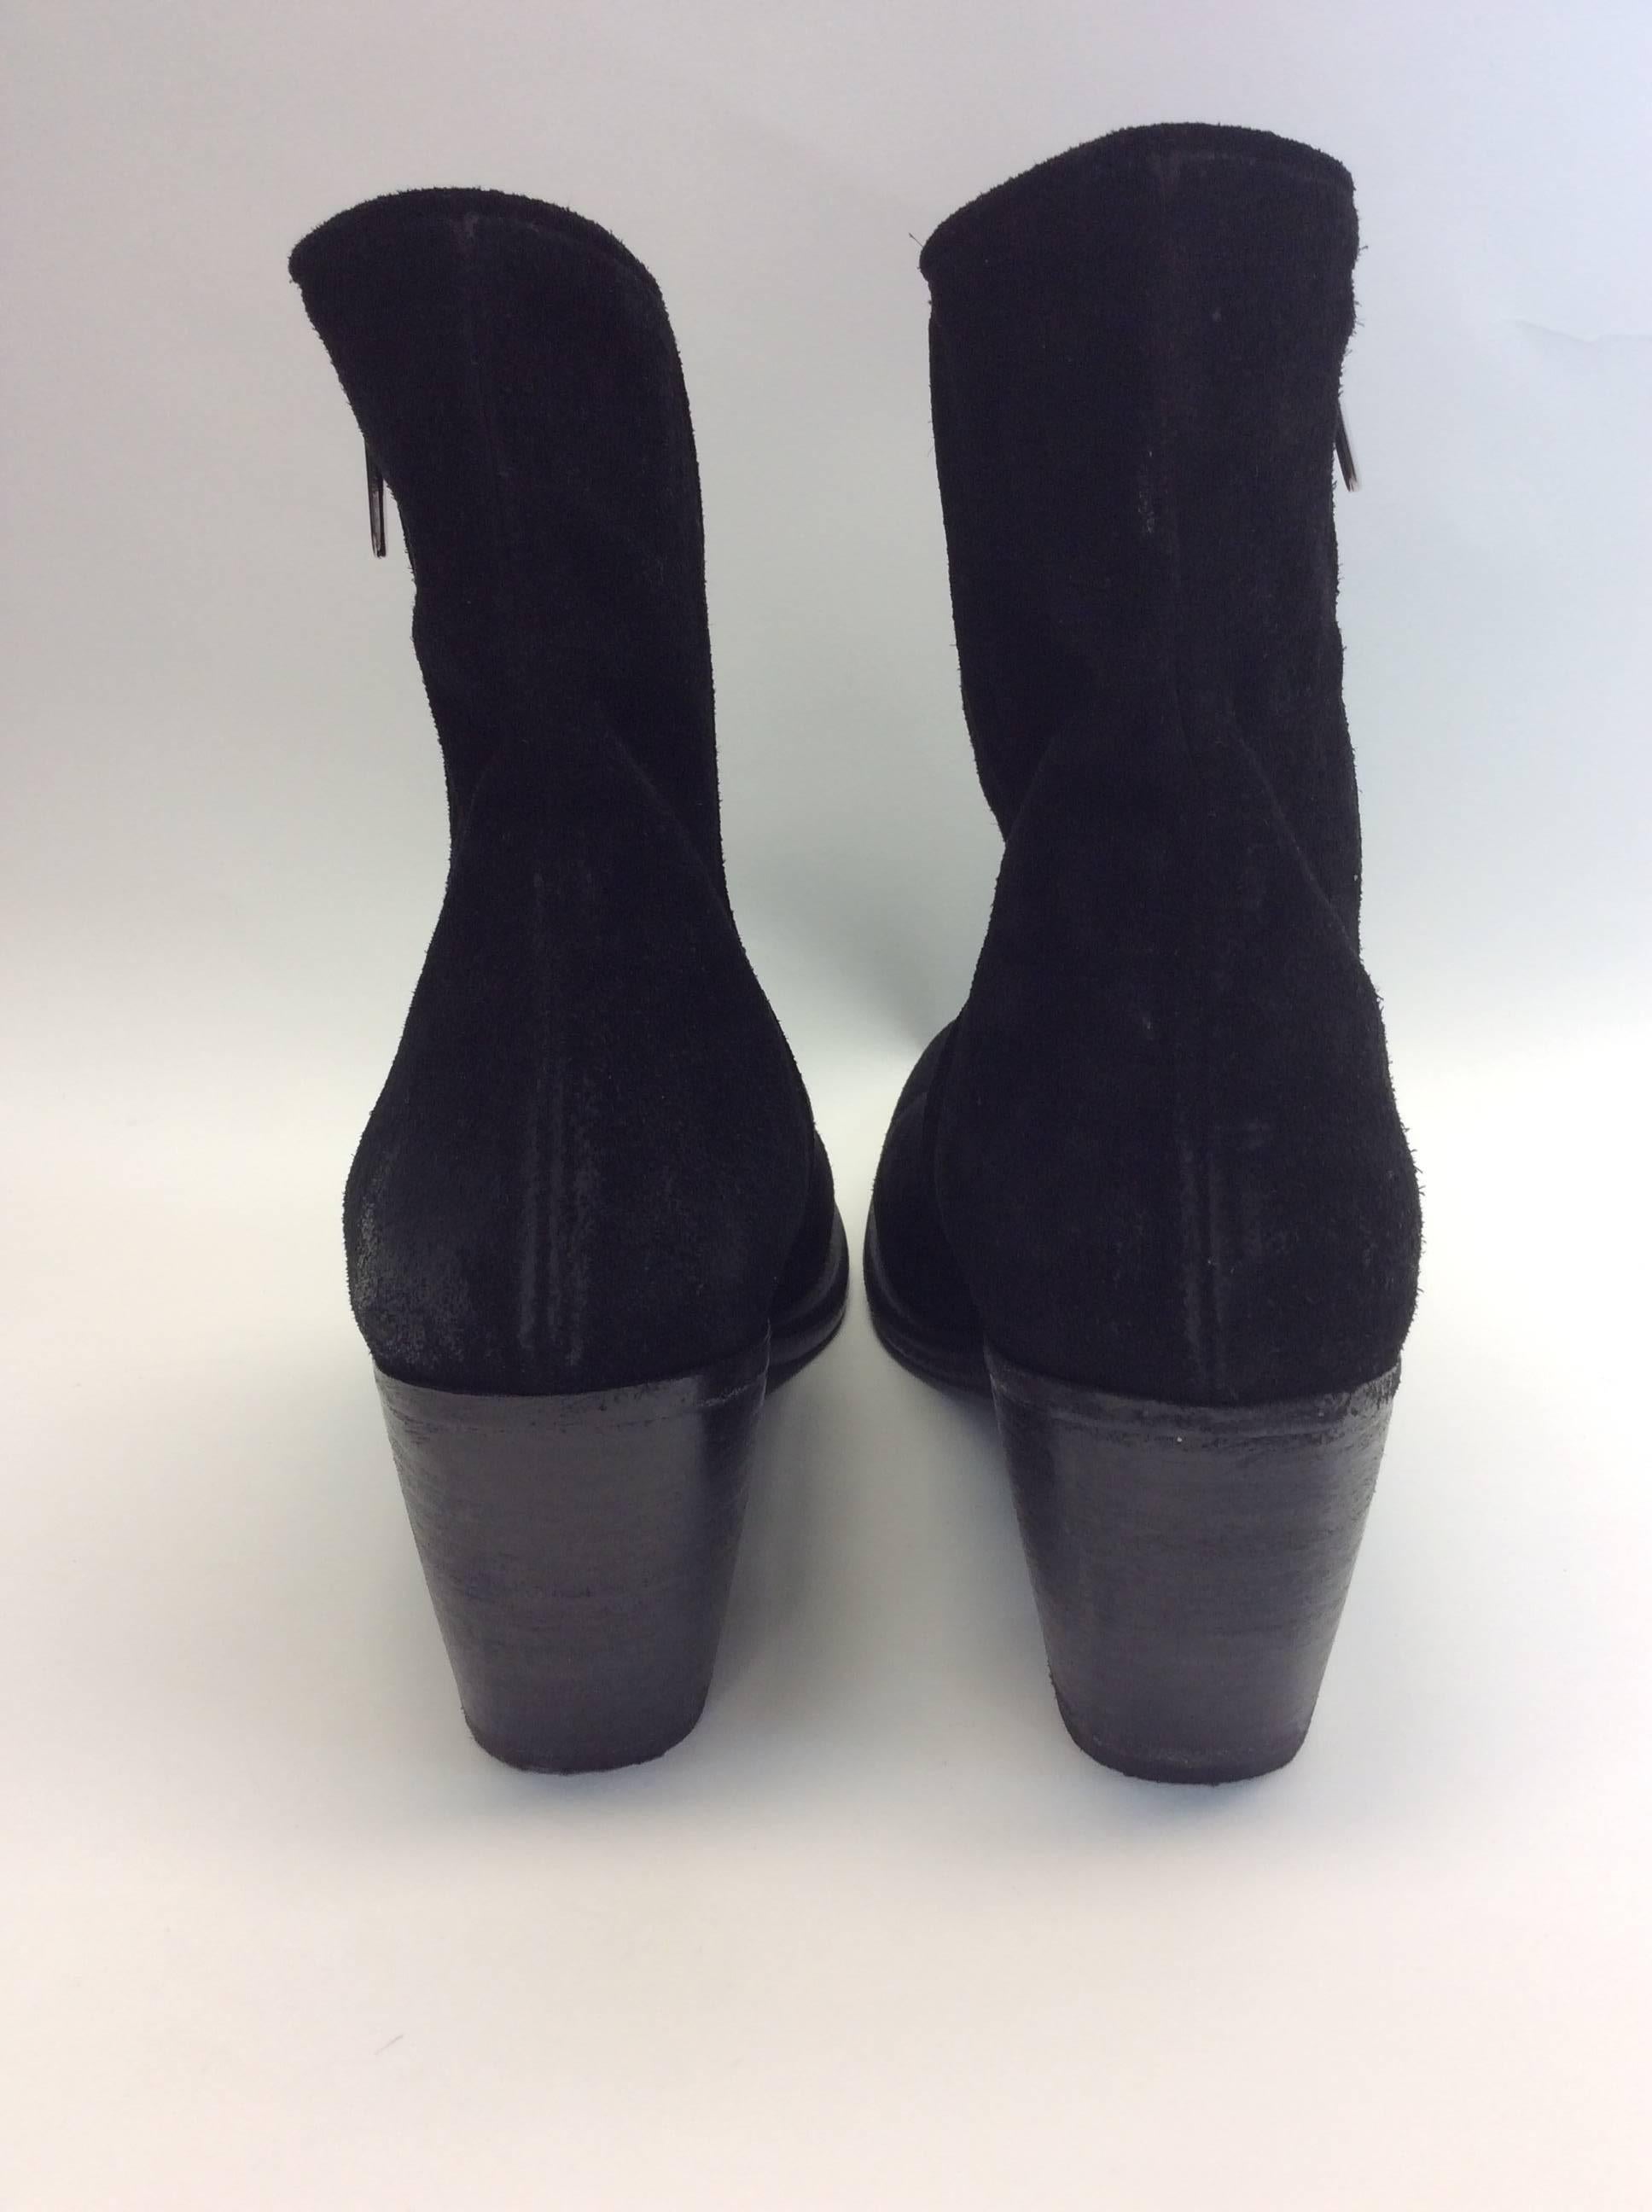 Barney's  Black Suede Ankle Booties In Excellent Condition For Sale In Narberth, PA